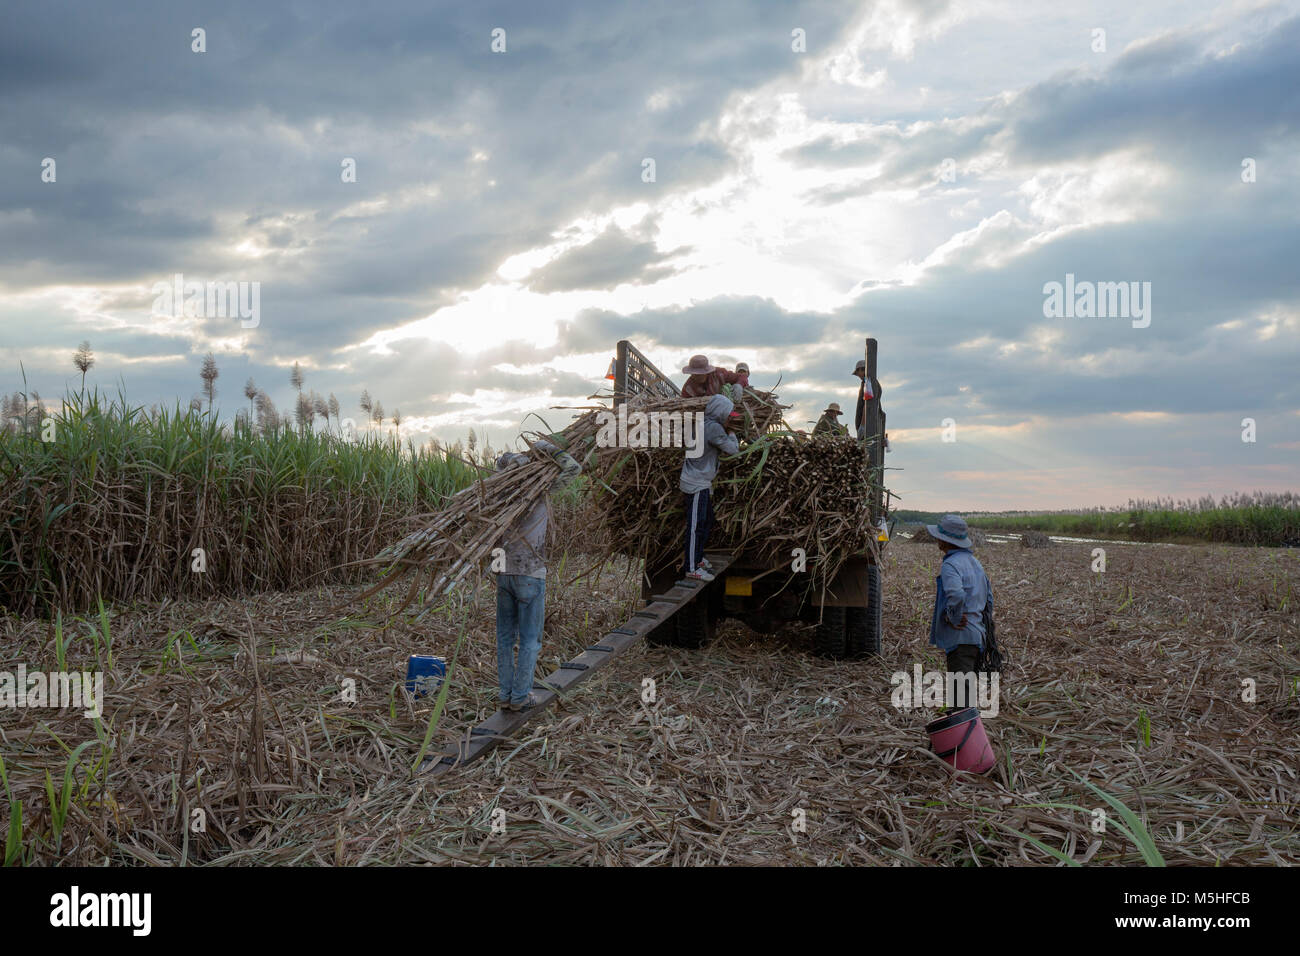 Harvesting sugar cane in in agriculture, Tây Ninh, Vietnam.  Materials of the sugar industry Stock Photo